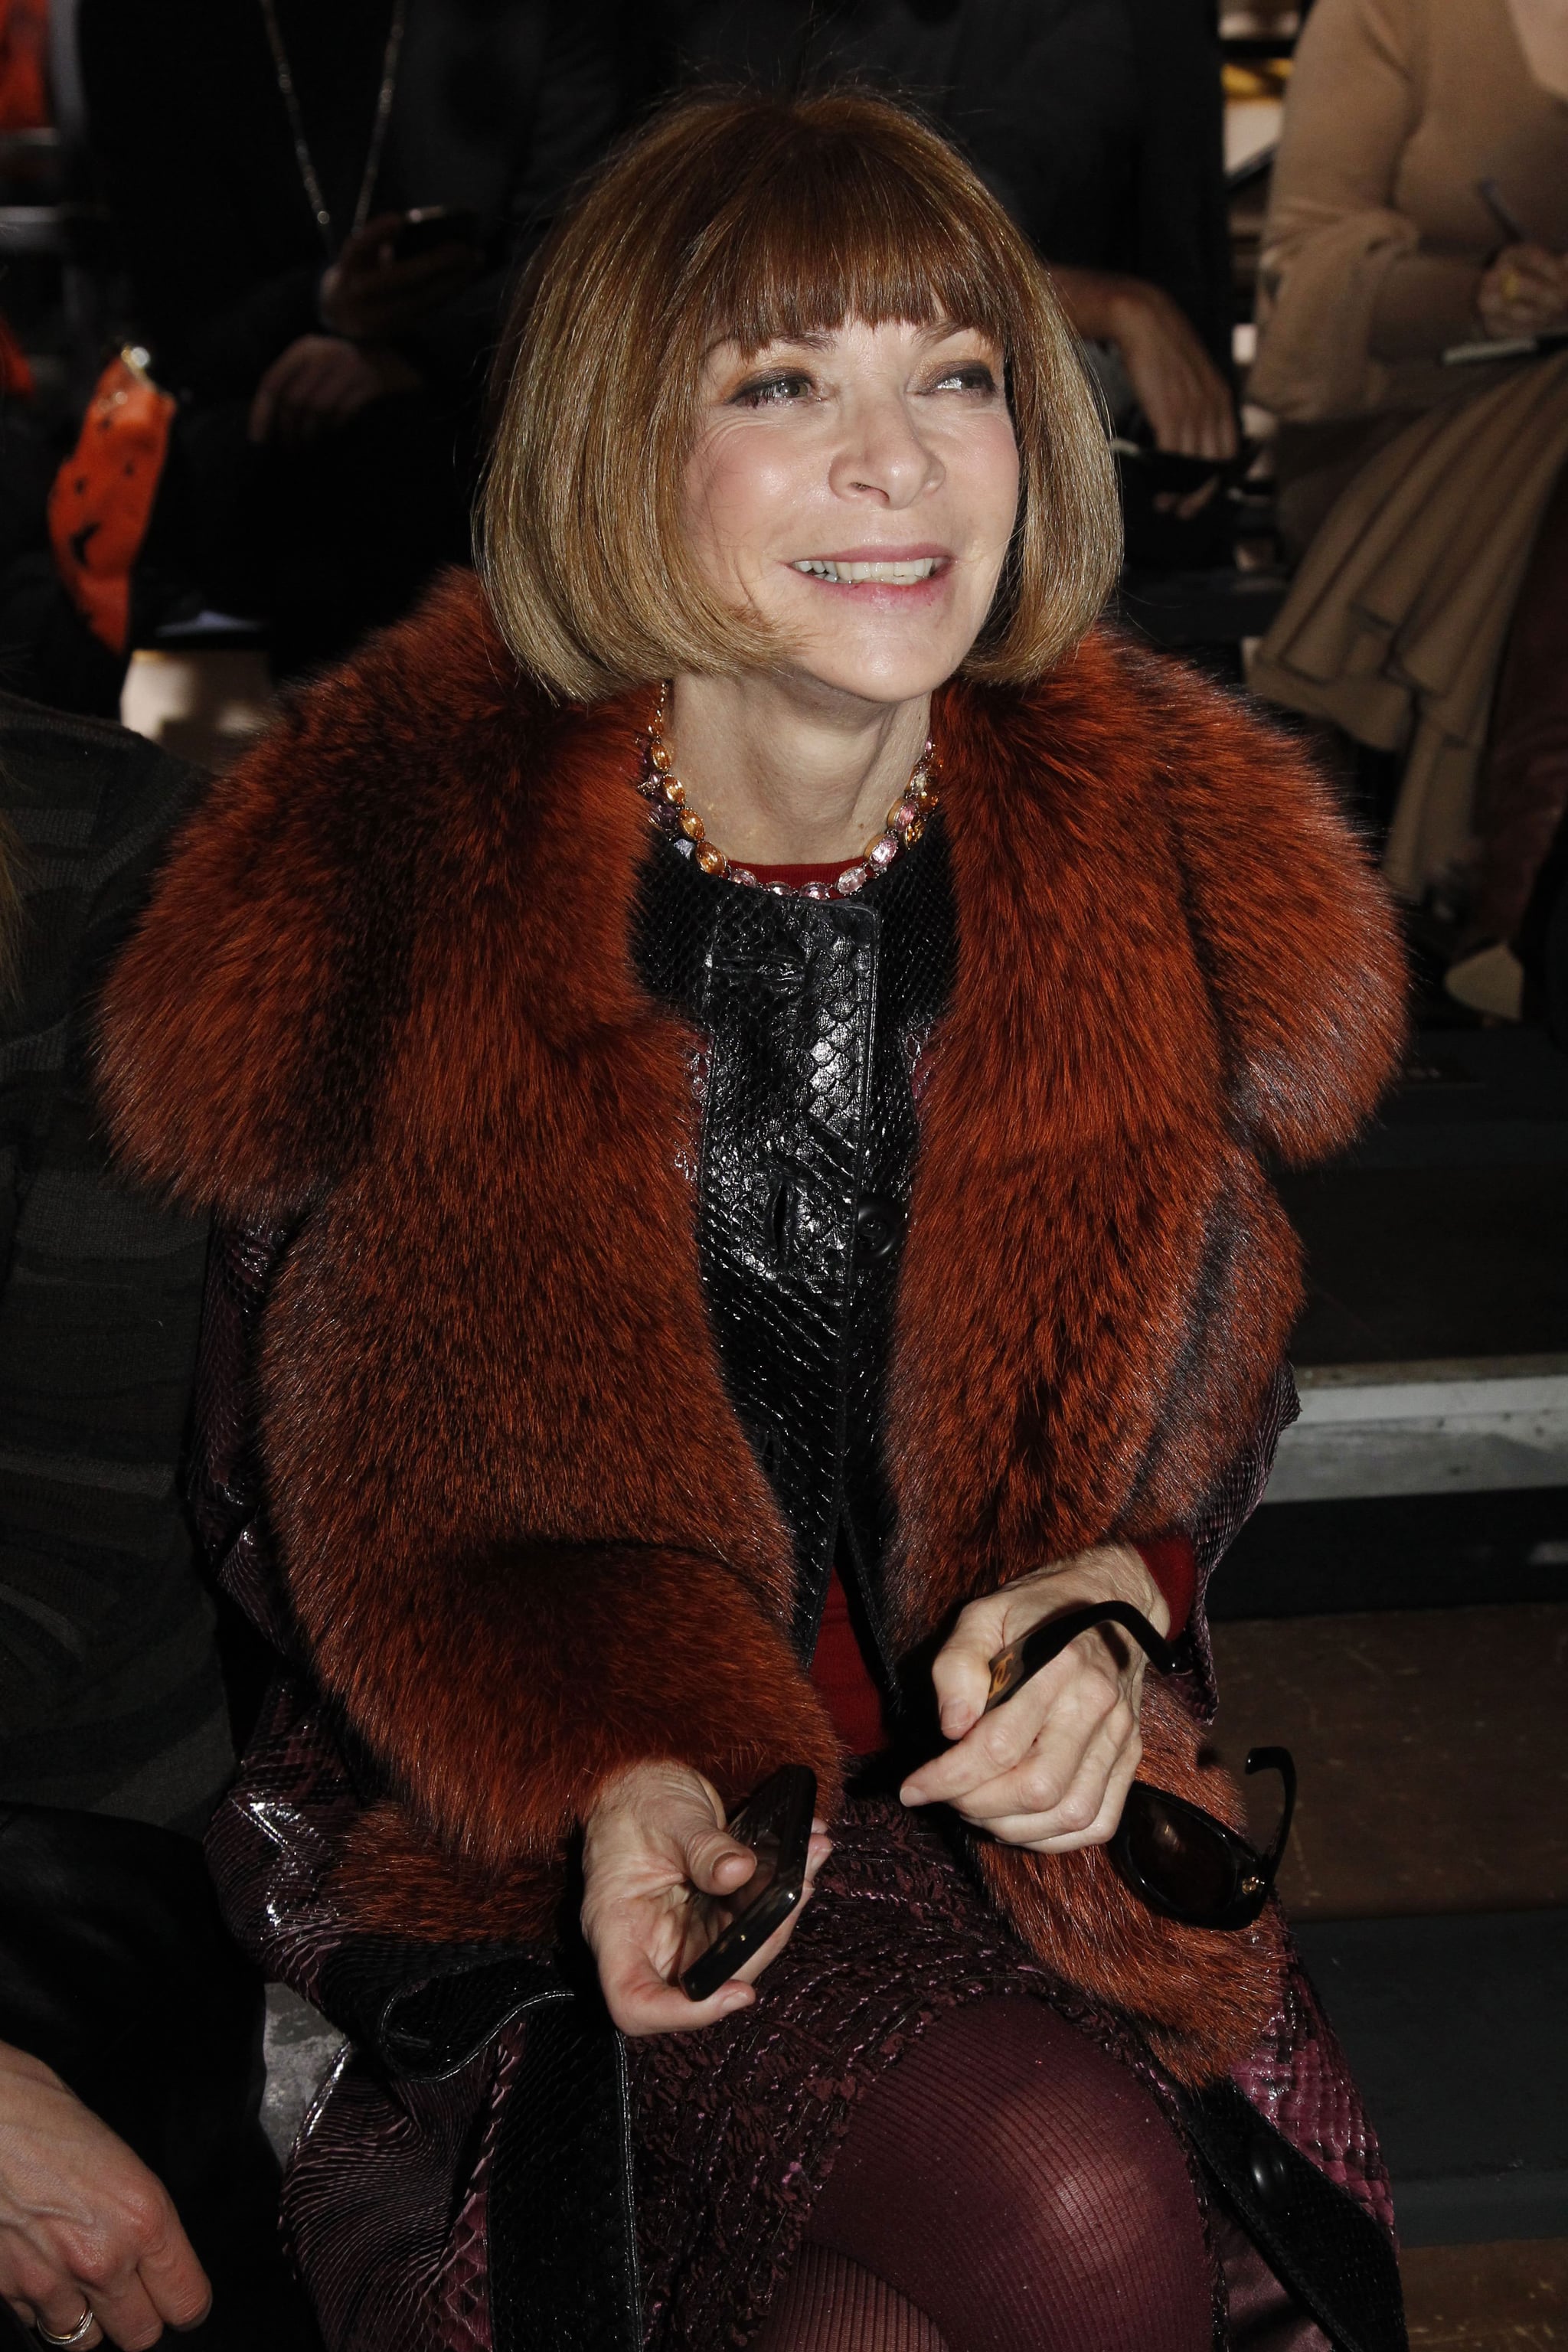 Anna Wintour showed off her signature 